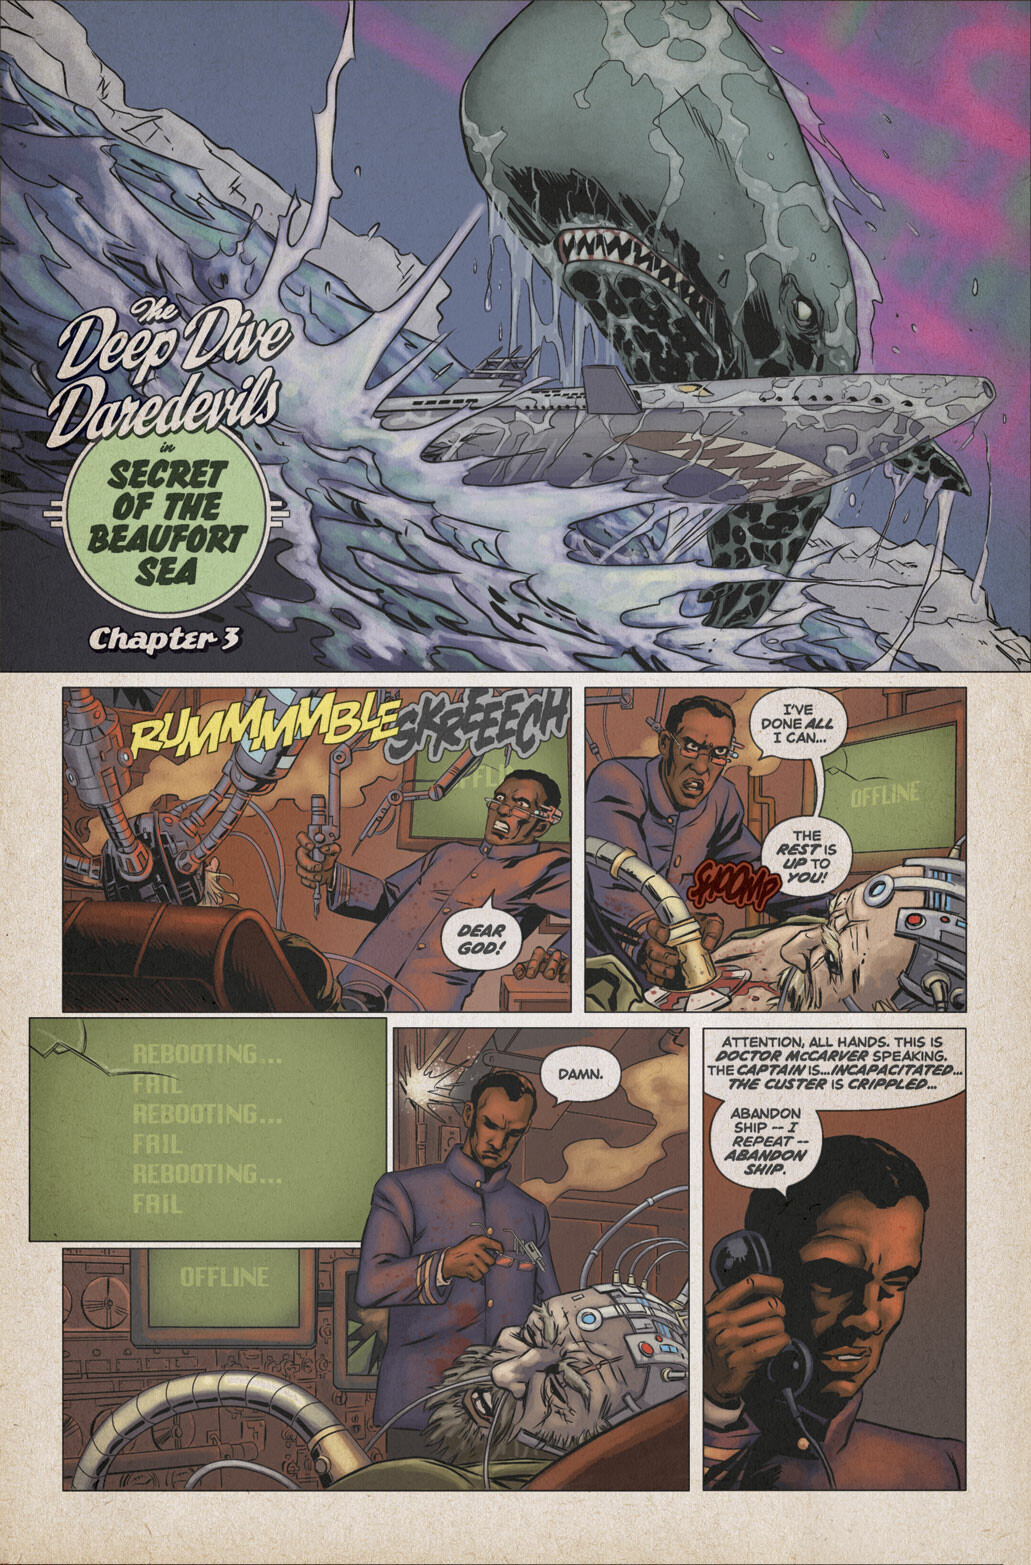 Deep Dive Daredevils, The Secret of the Beaufort Sea.
Page 20